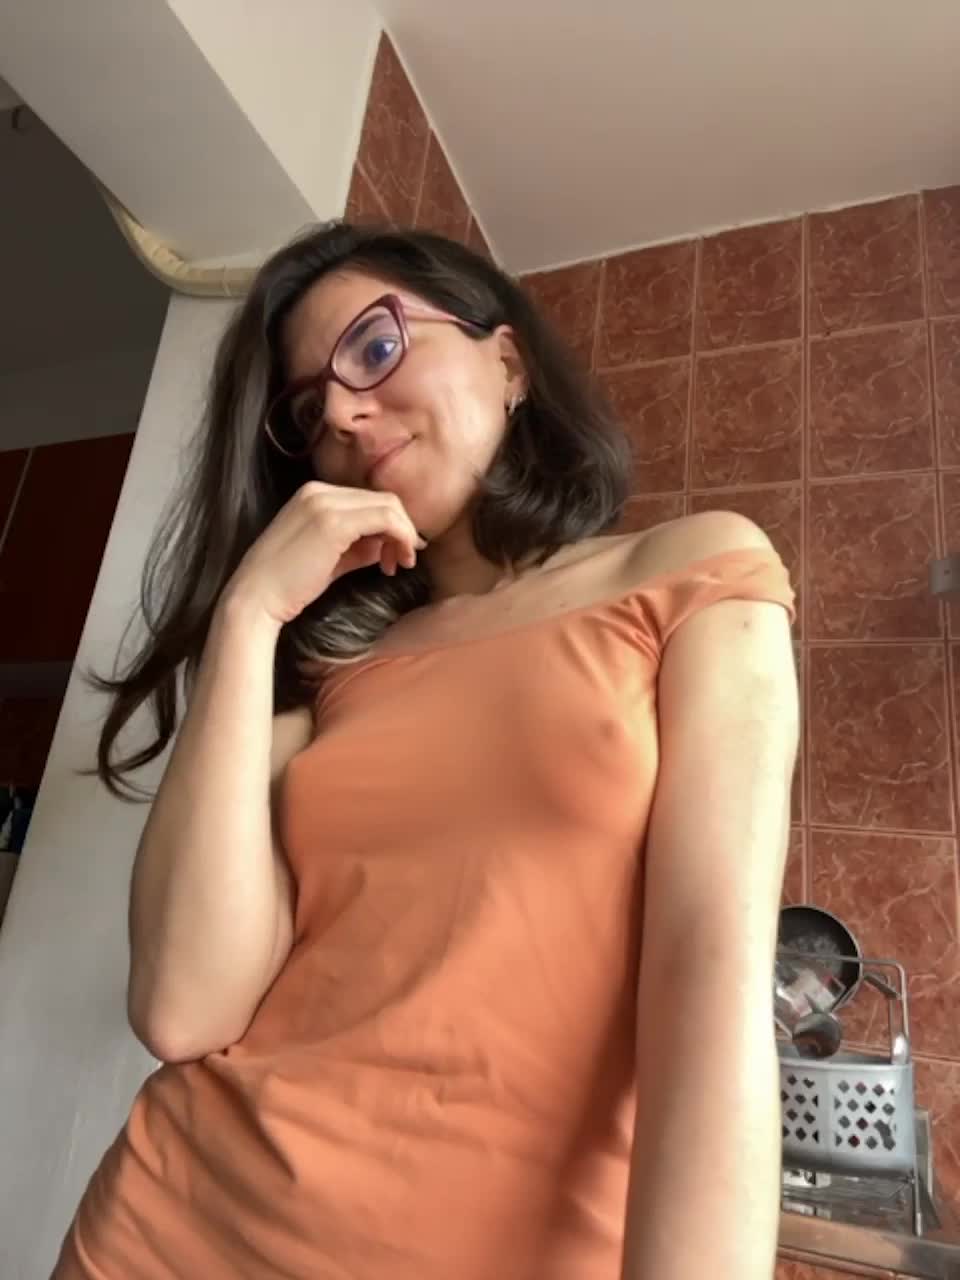 View or download file christineswee on 2023-02-23 from bongacams